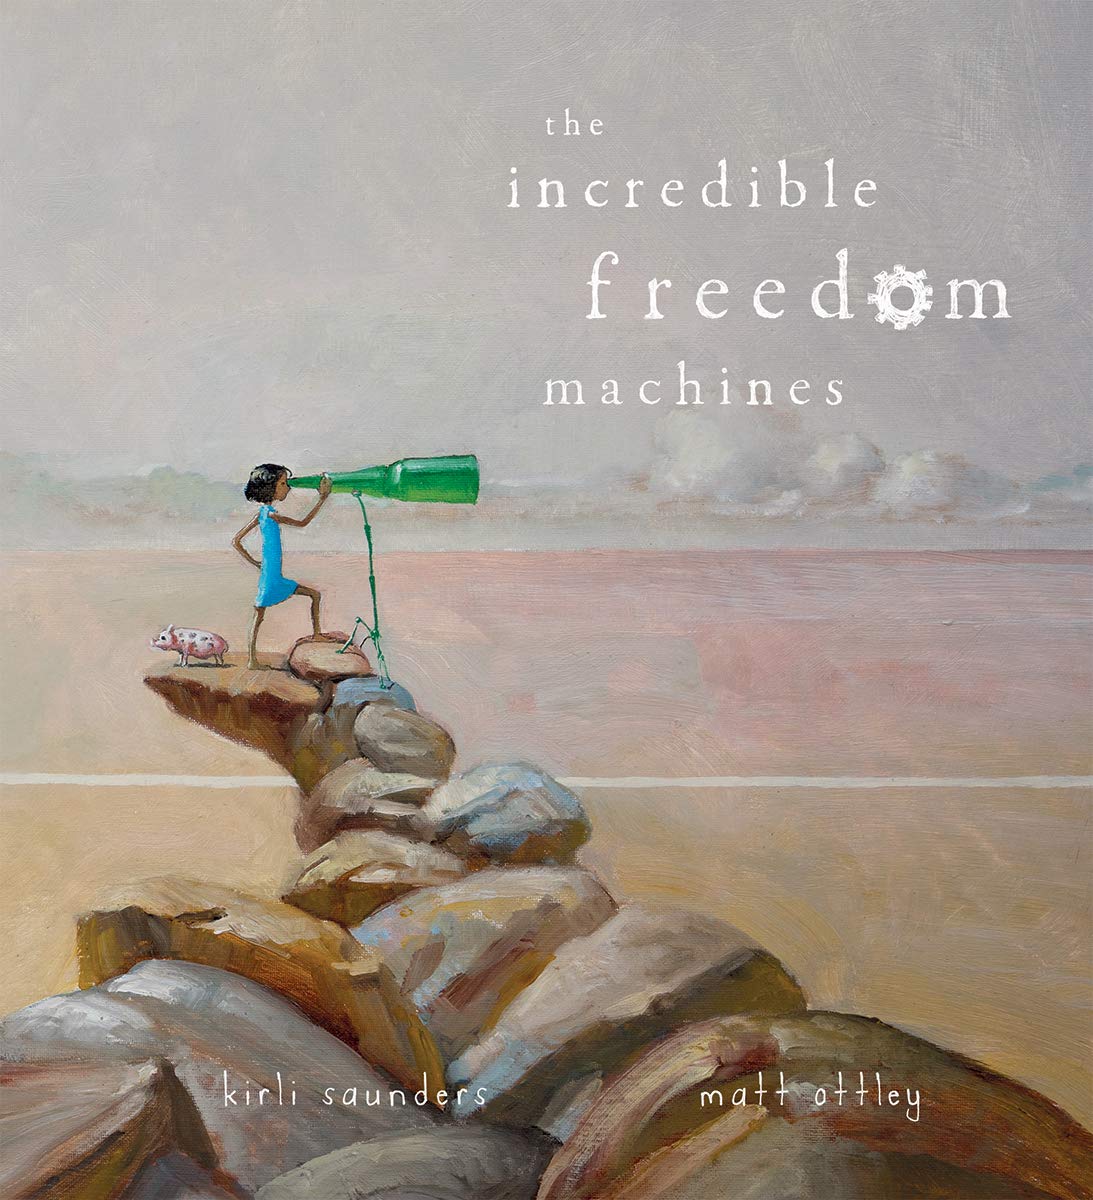 The incridible freedom machines